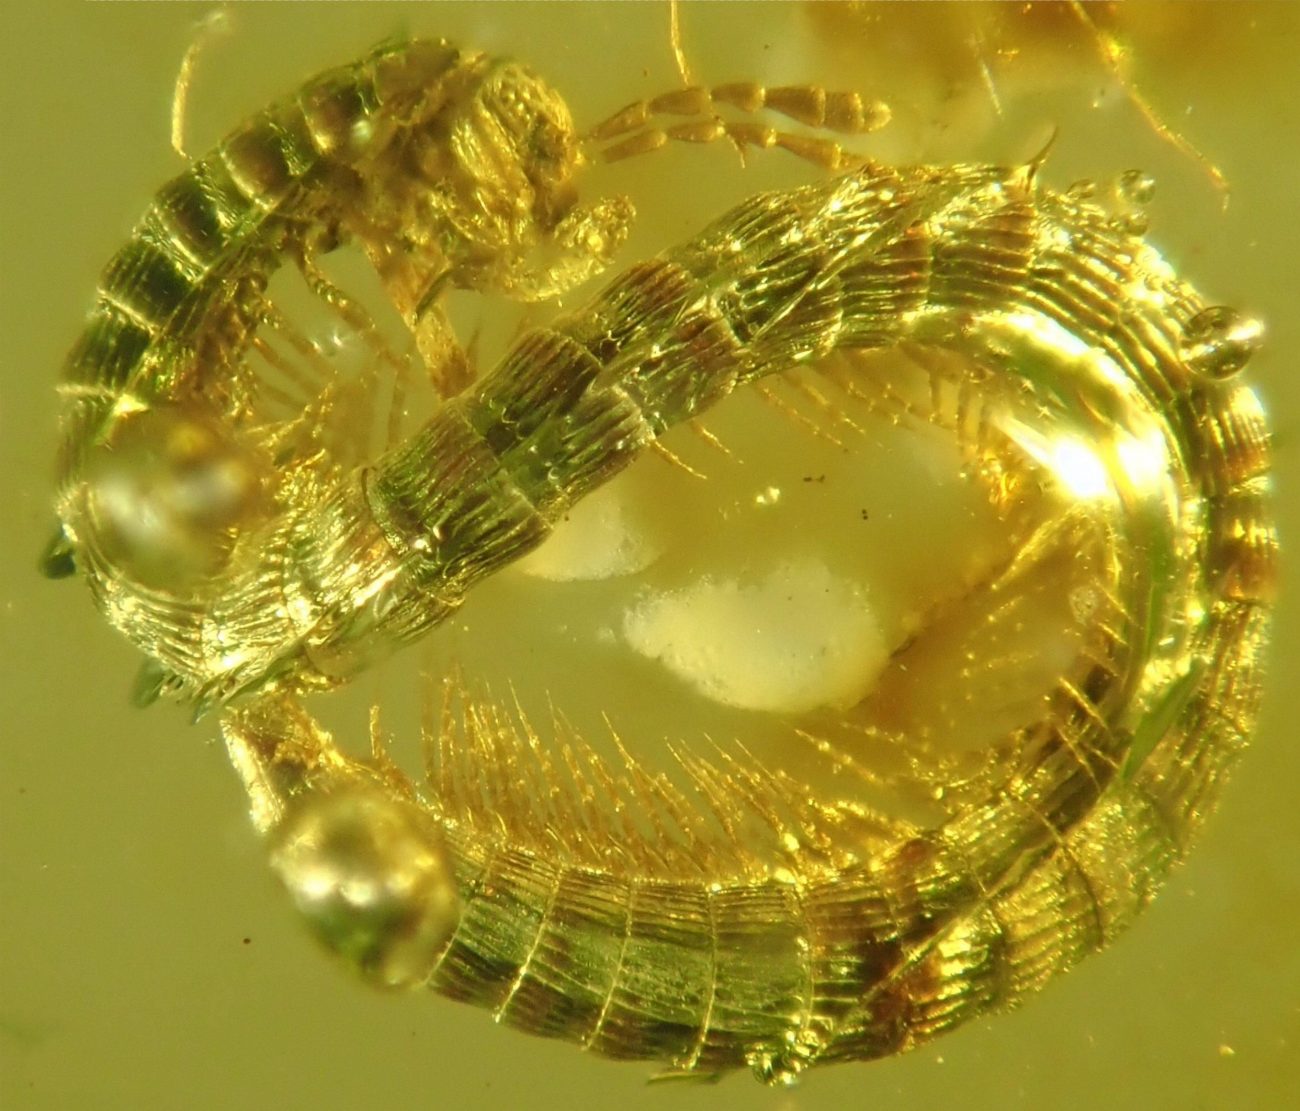 The tiny create preserved in amber. Image Credit: Leif Moritz.